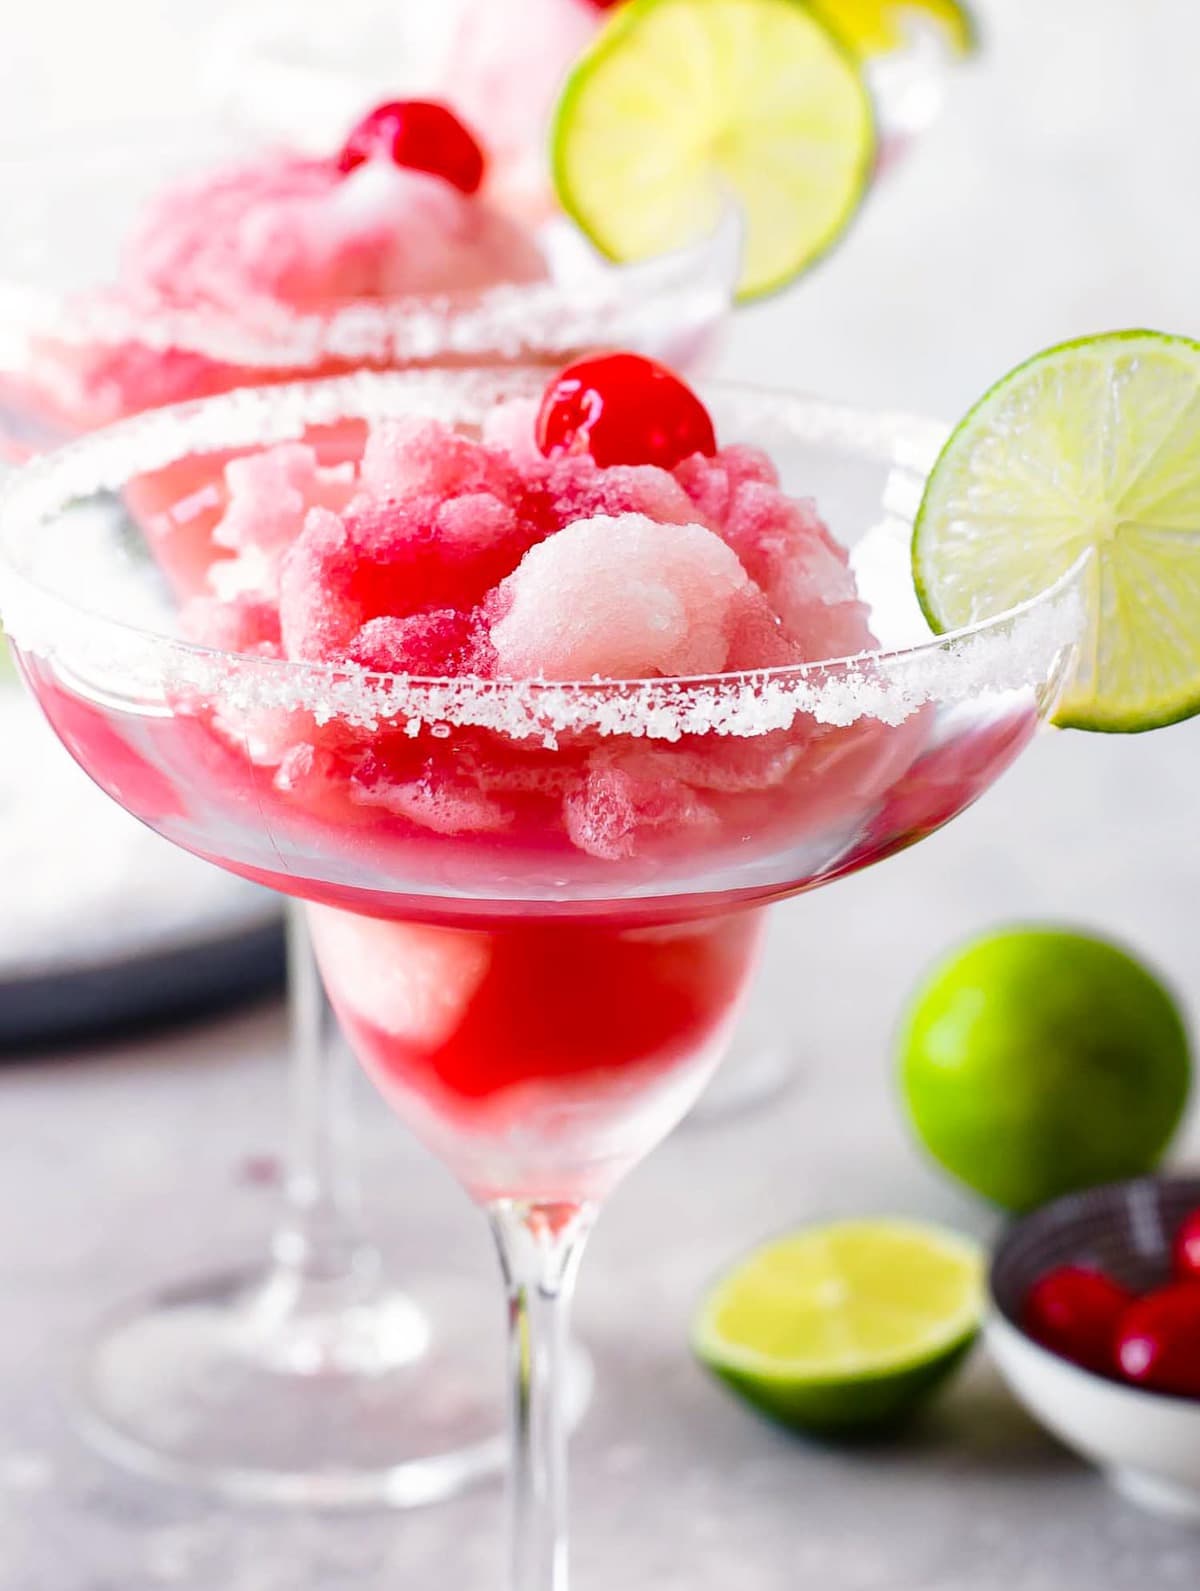 Frozen Margarita topped with cherries and garnished with lime.